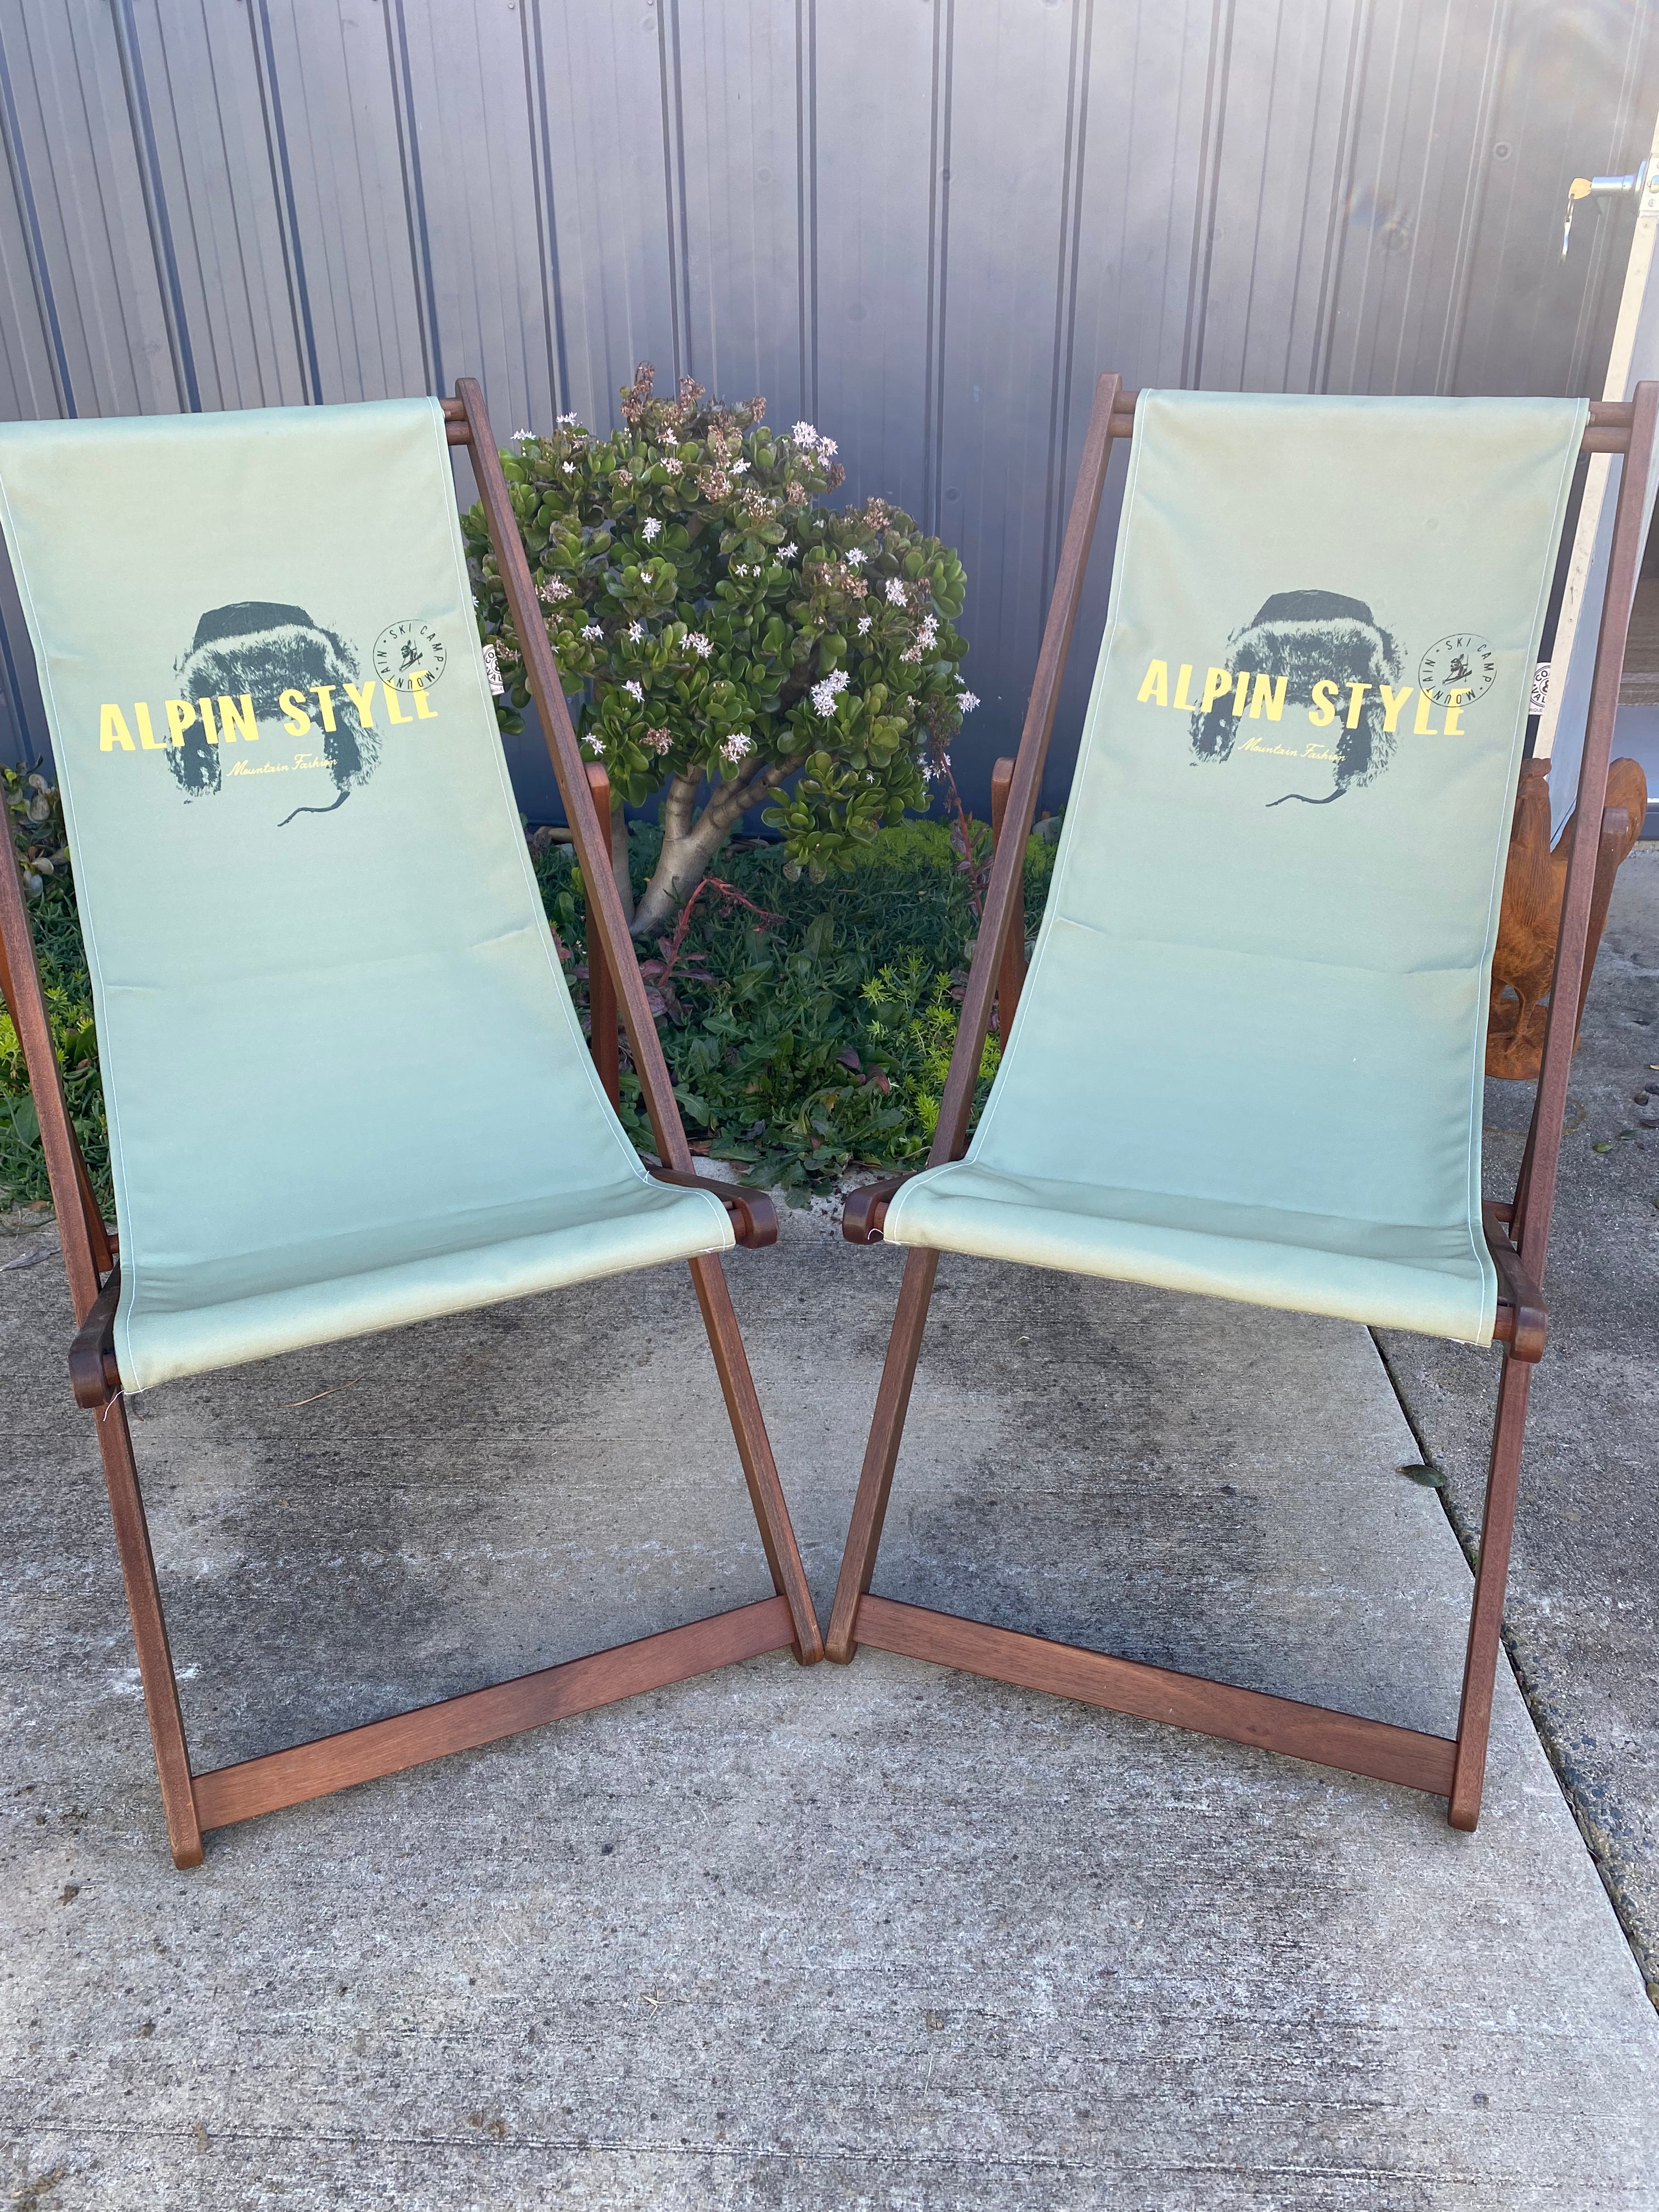 Pair of Coast & Valley Deck Chairs: Alpin Style design showing words in yellow with fur hat on a plain eucalyptus green background. 2 chairs facing forward. On a concrete floor against a blue steel shed and door with garden bed in the background.